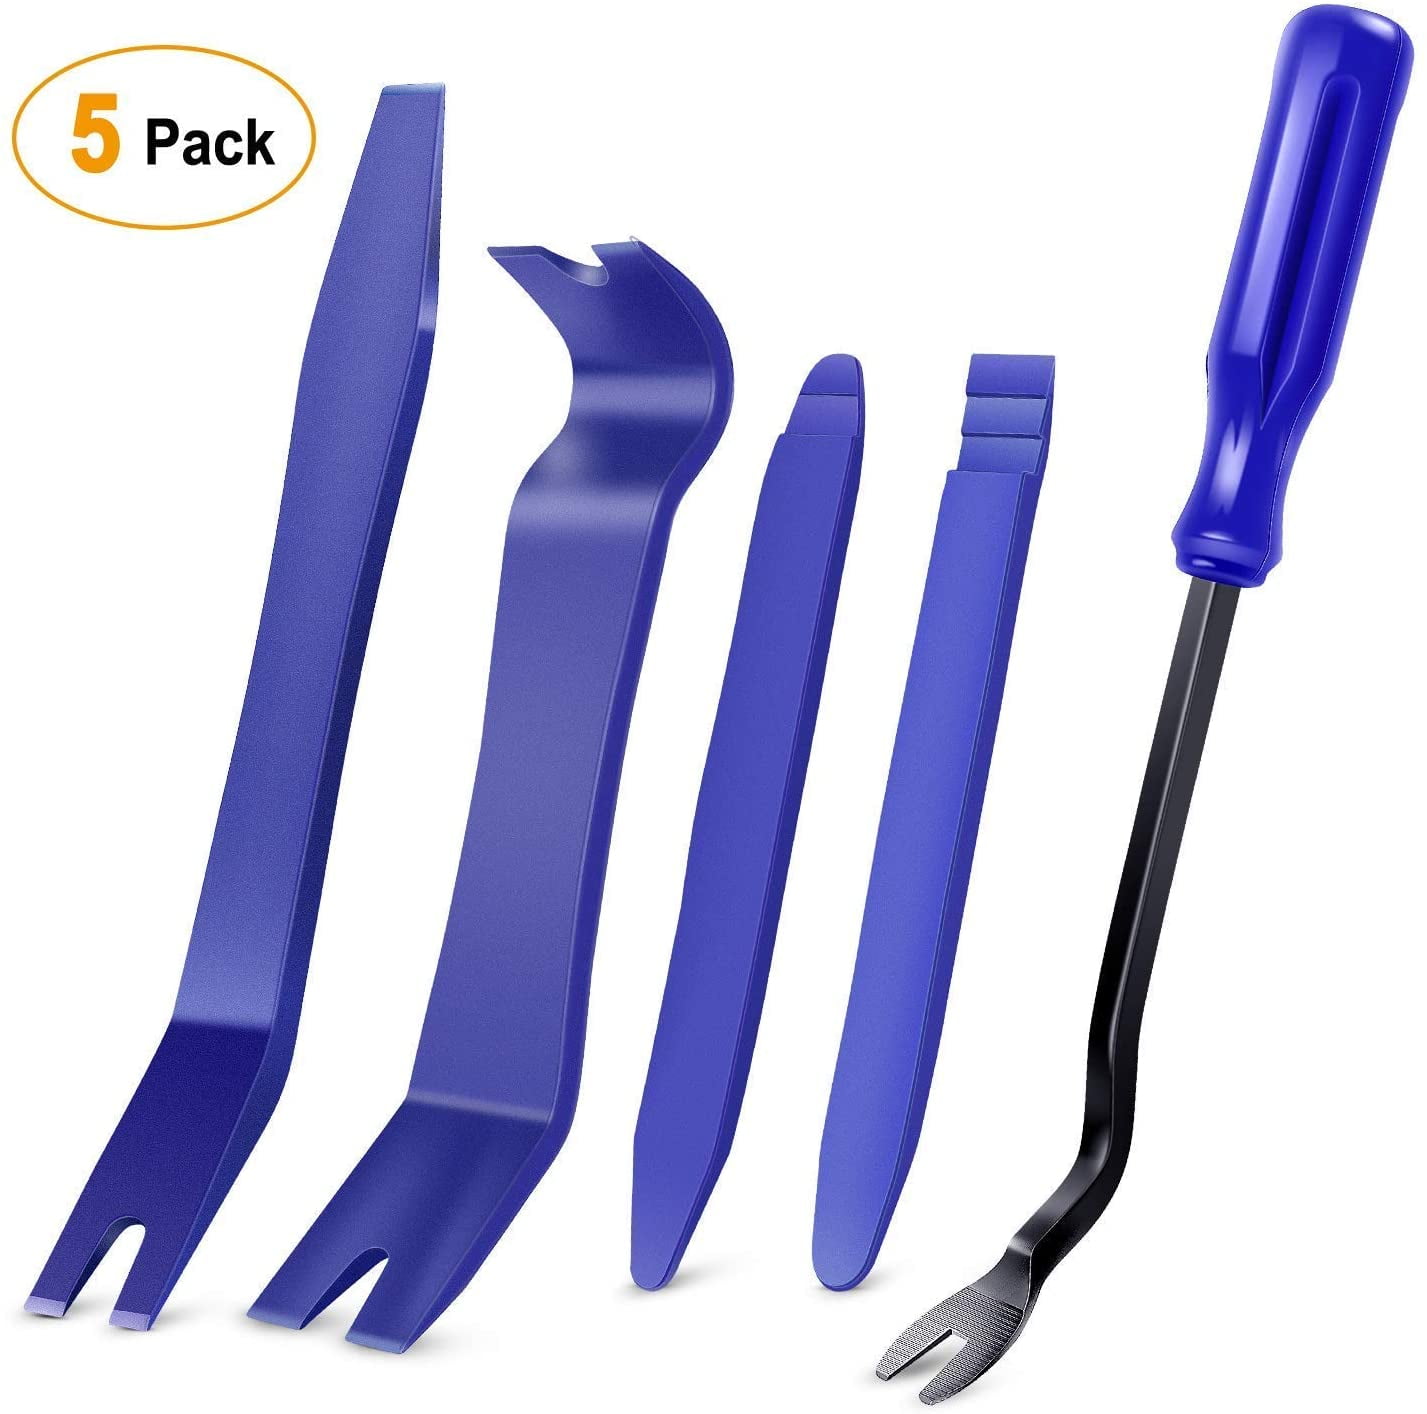 12pcs/set Automotive Repair Tool Kit, Suitable For Car Audio Disassembly,  Soundproofing, Door & Panel Modification And Thicker Prying Plate, Etc.